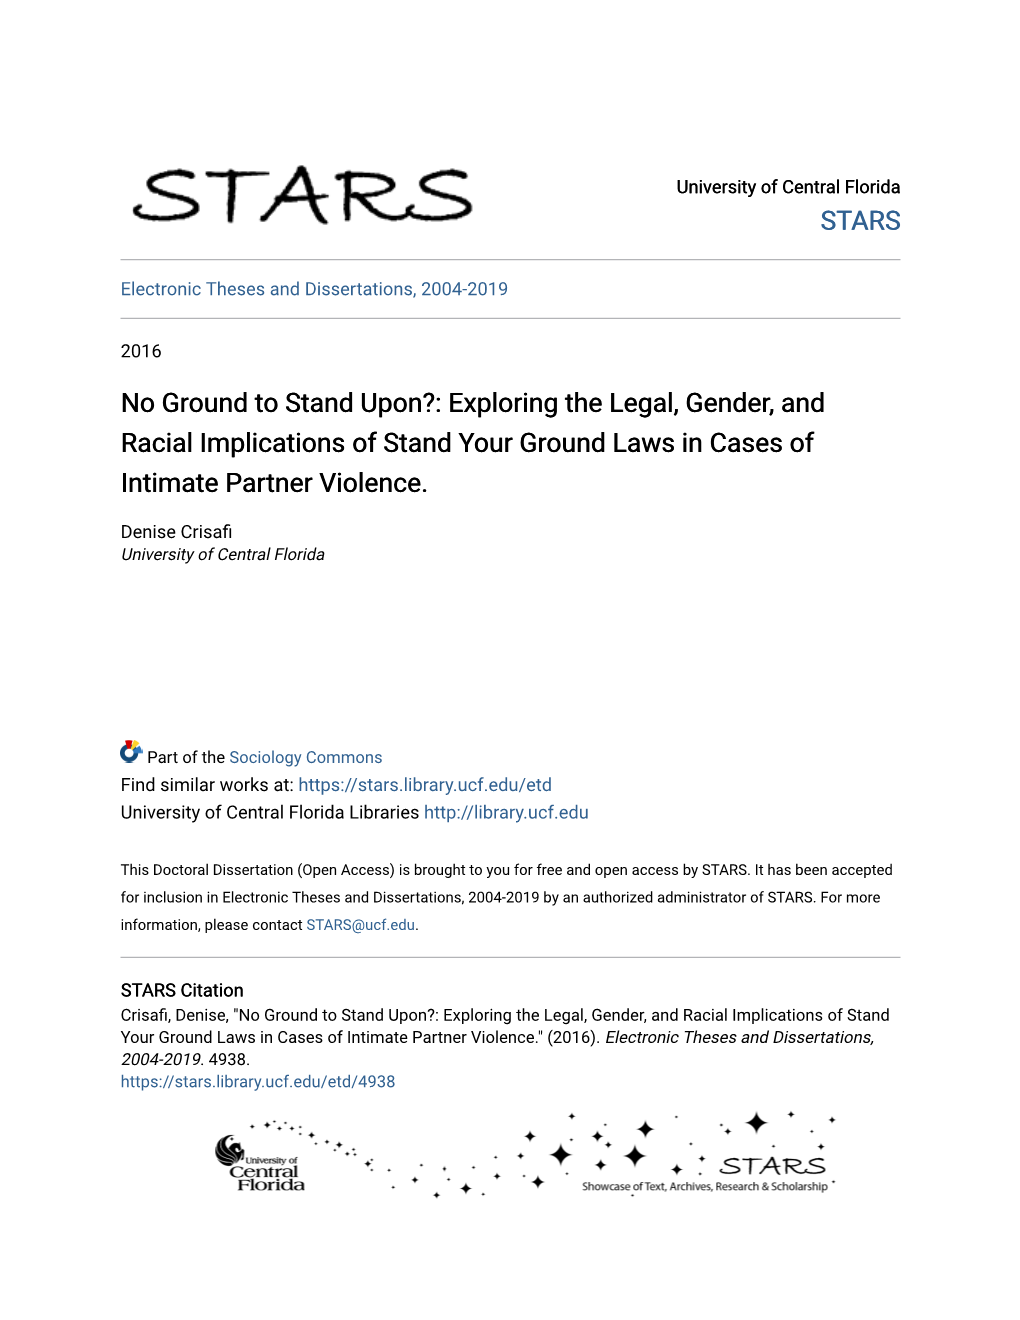 Exploring the Legal, Gender, and Racial Implications of Stand Your Ground Laws in Cases of Intimate Partner Violence